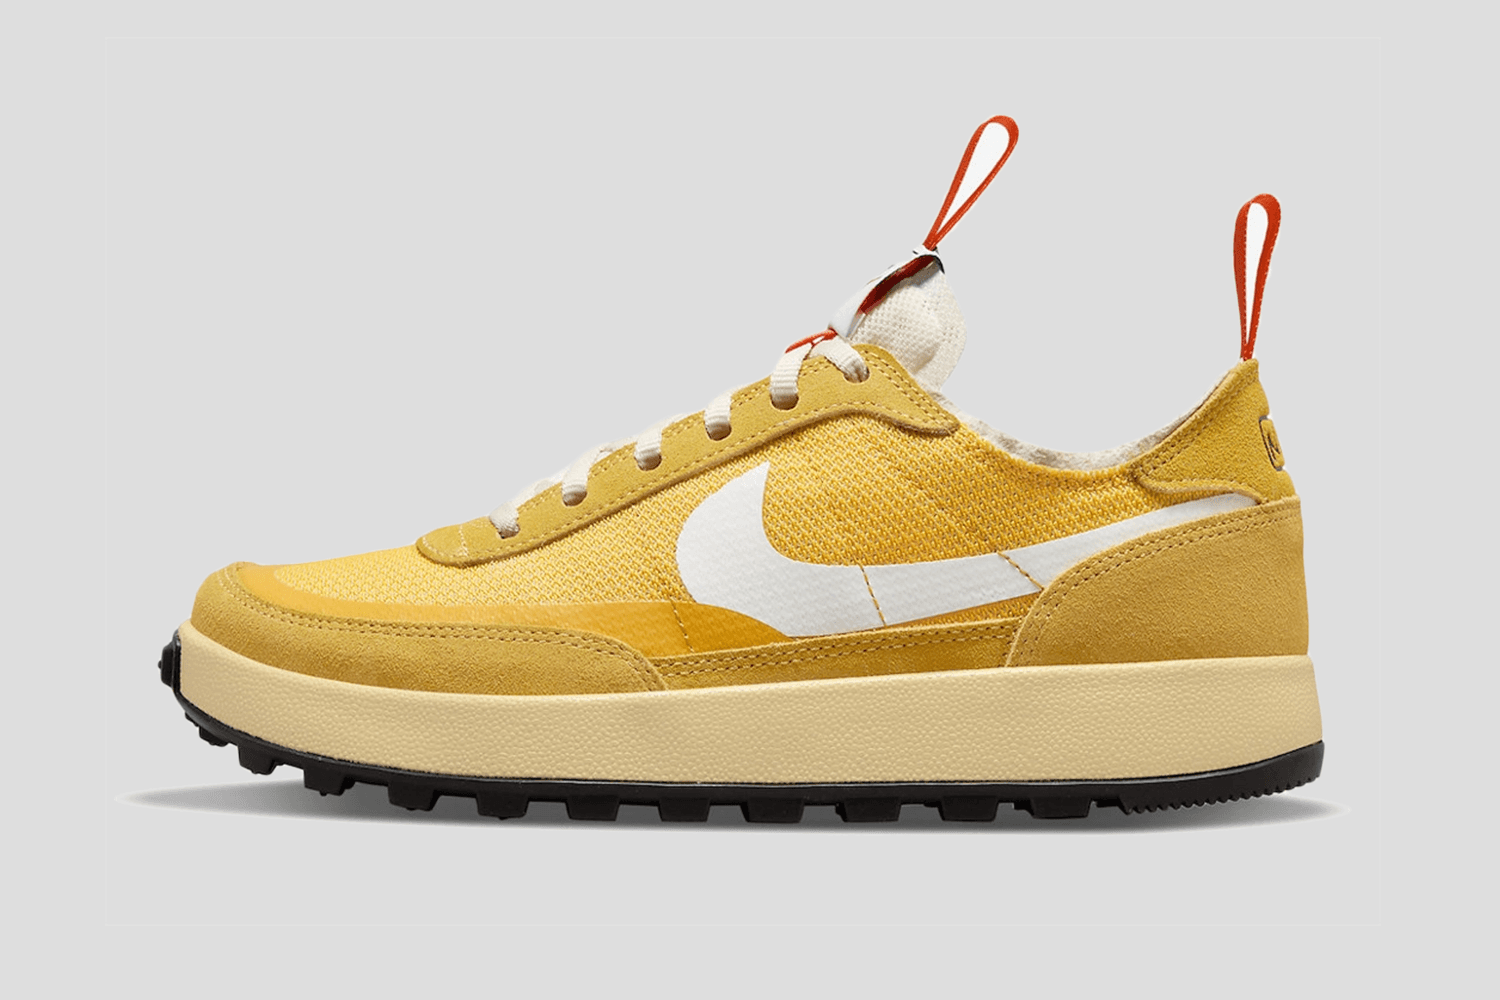 The Tom Sachs x Nike General Purpose Shoe 'Archive' has a release date